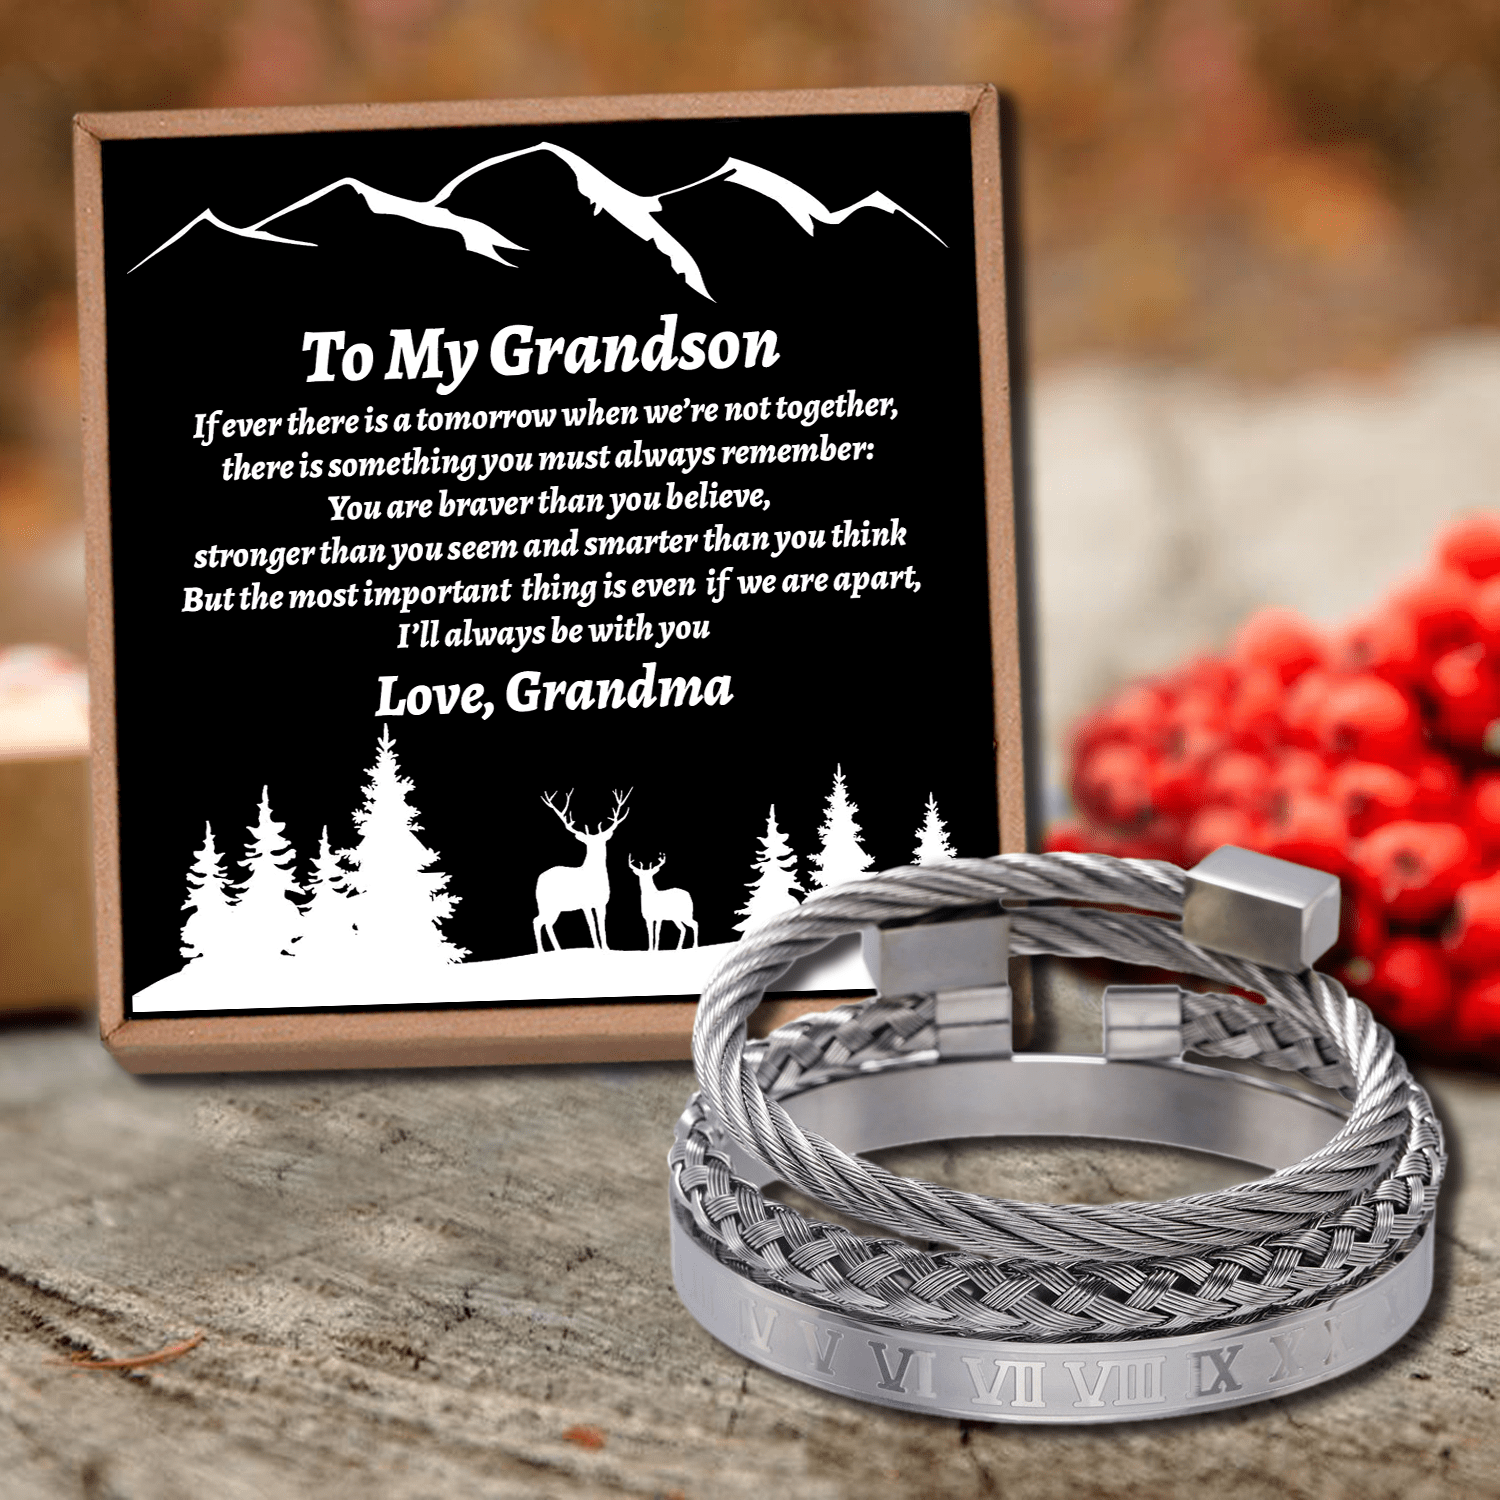 Bracelets Grandma To Grandson - I Will Always Be With You Roman Numeral Bracelet Set Silver GiveMe-Gifts